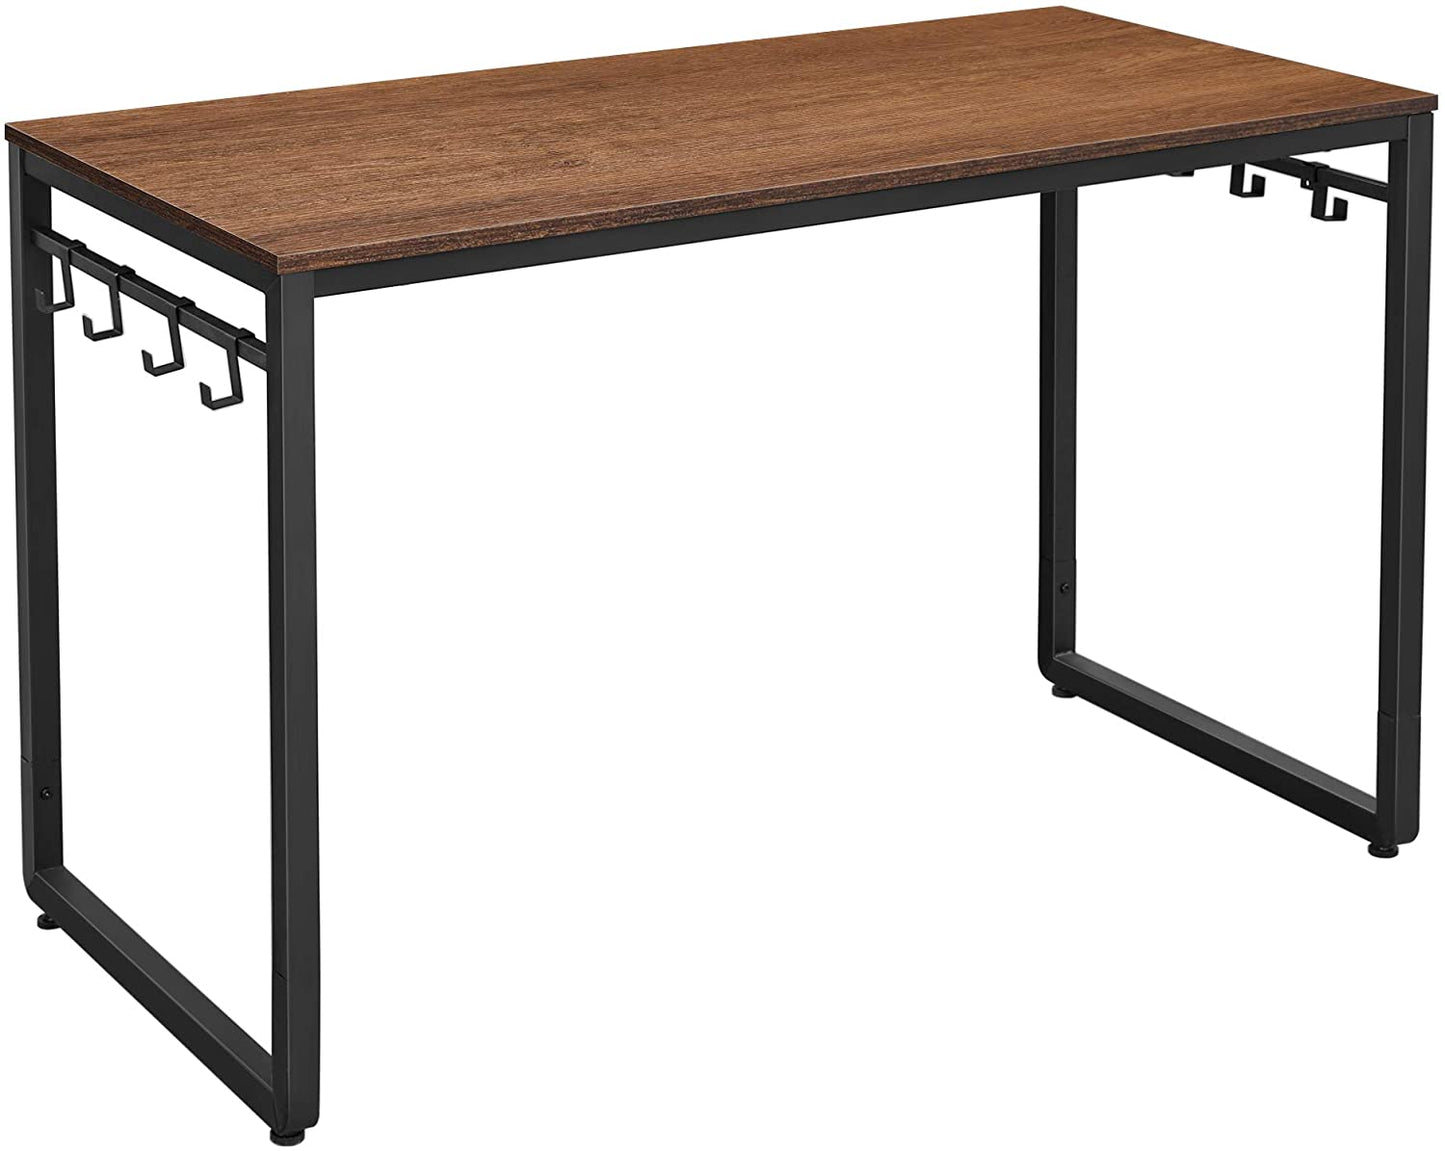 Study Table : 47 Inch Office Study Table, Work from Home